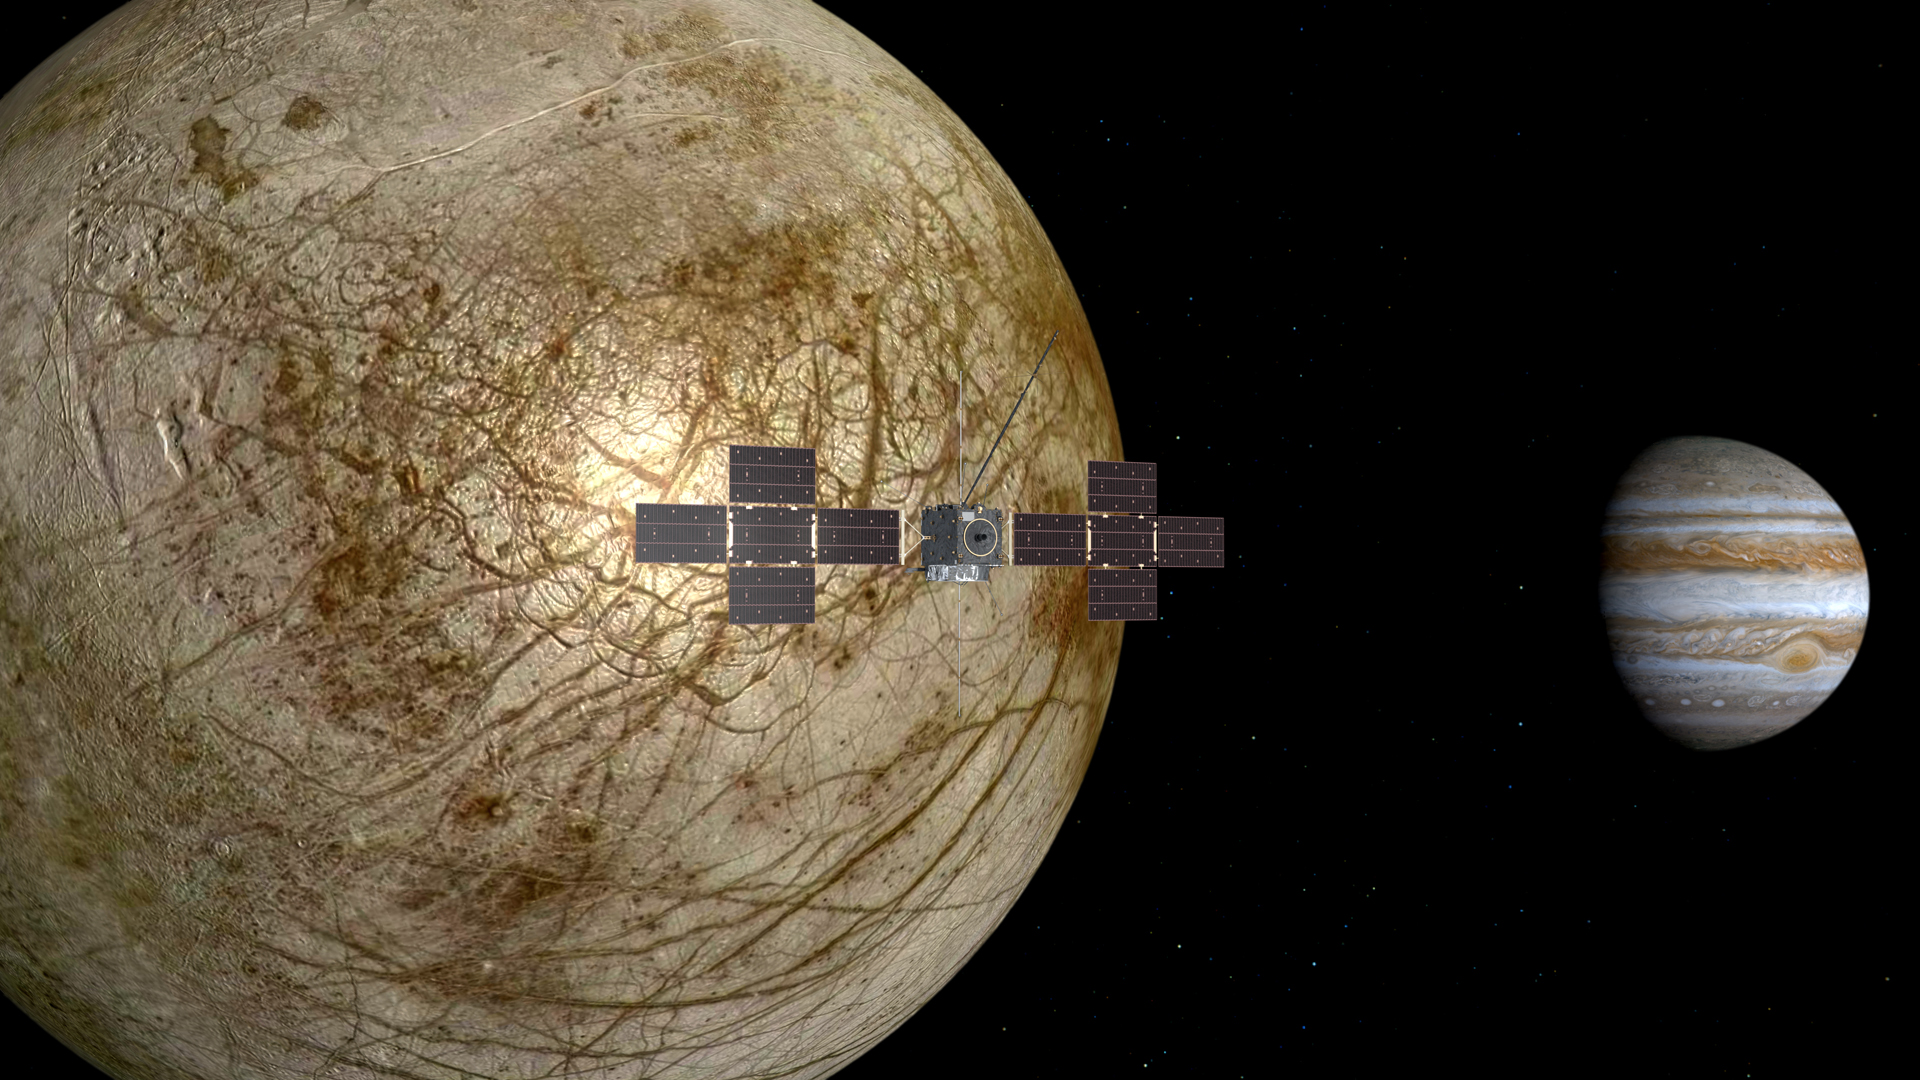 Artist's illustration shows the JUICE spacecraft in the foreground, the scarred surface of Europa is behind and Jupiter is off to the distance on the right side of the image.